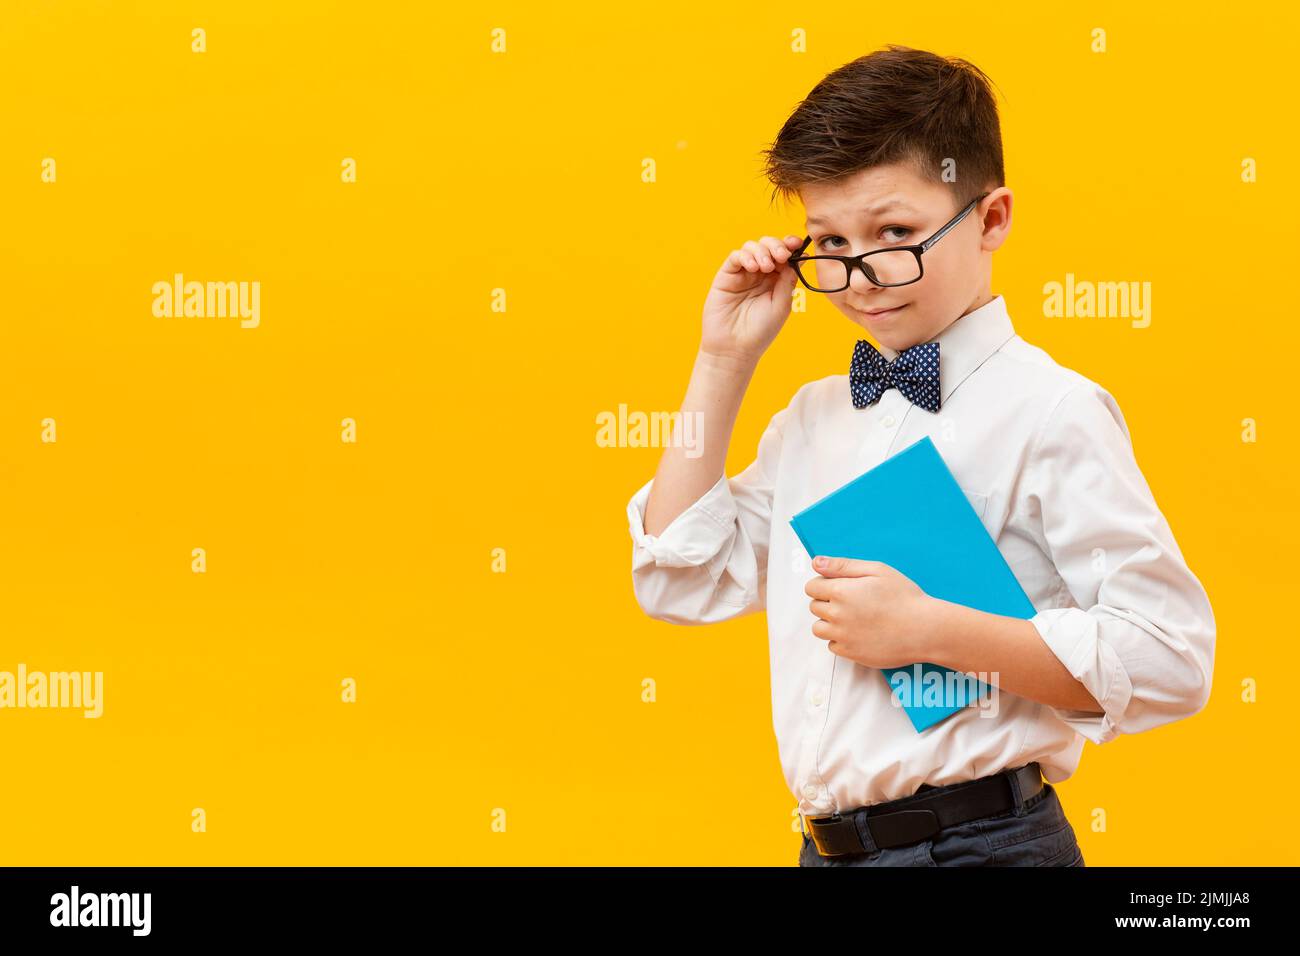 Young boy with glasses holding book Stock Photo